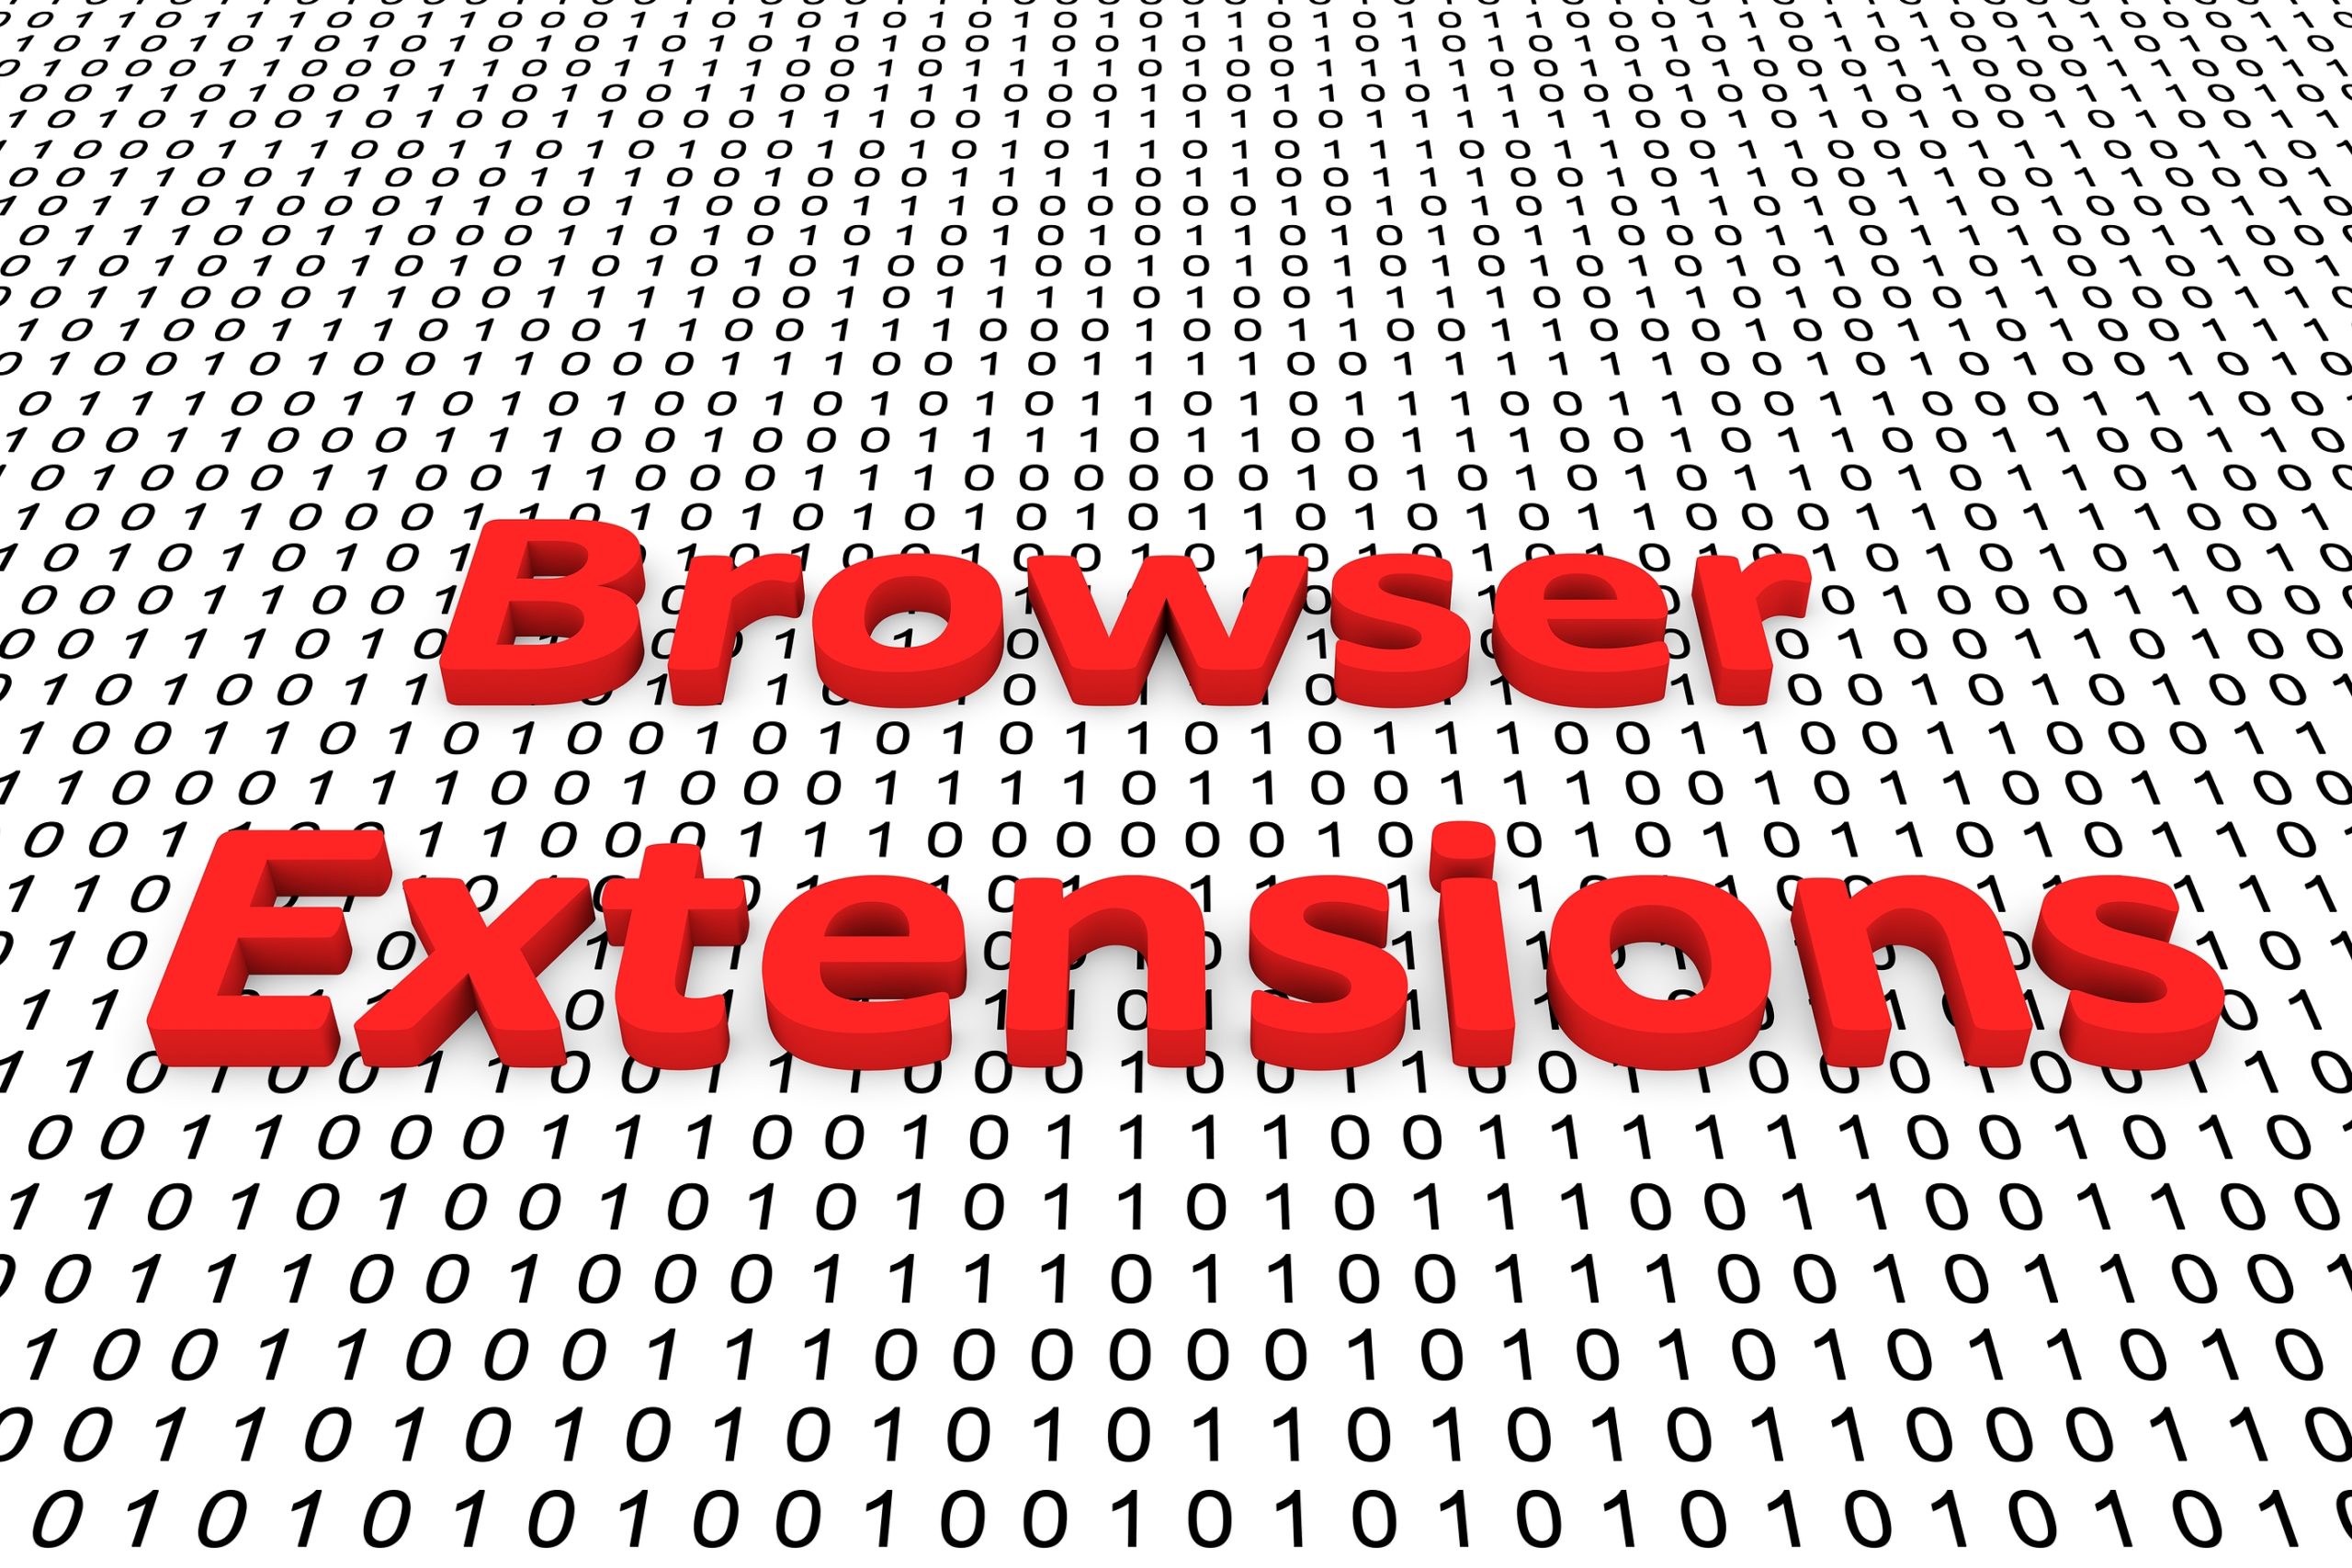 What Risks Are Involved With Browser Extensions?